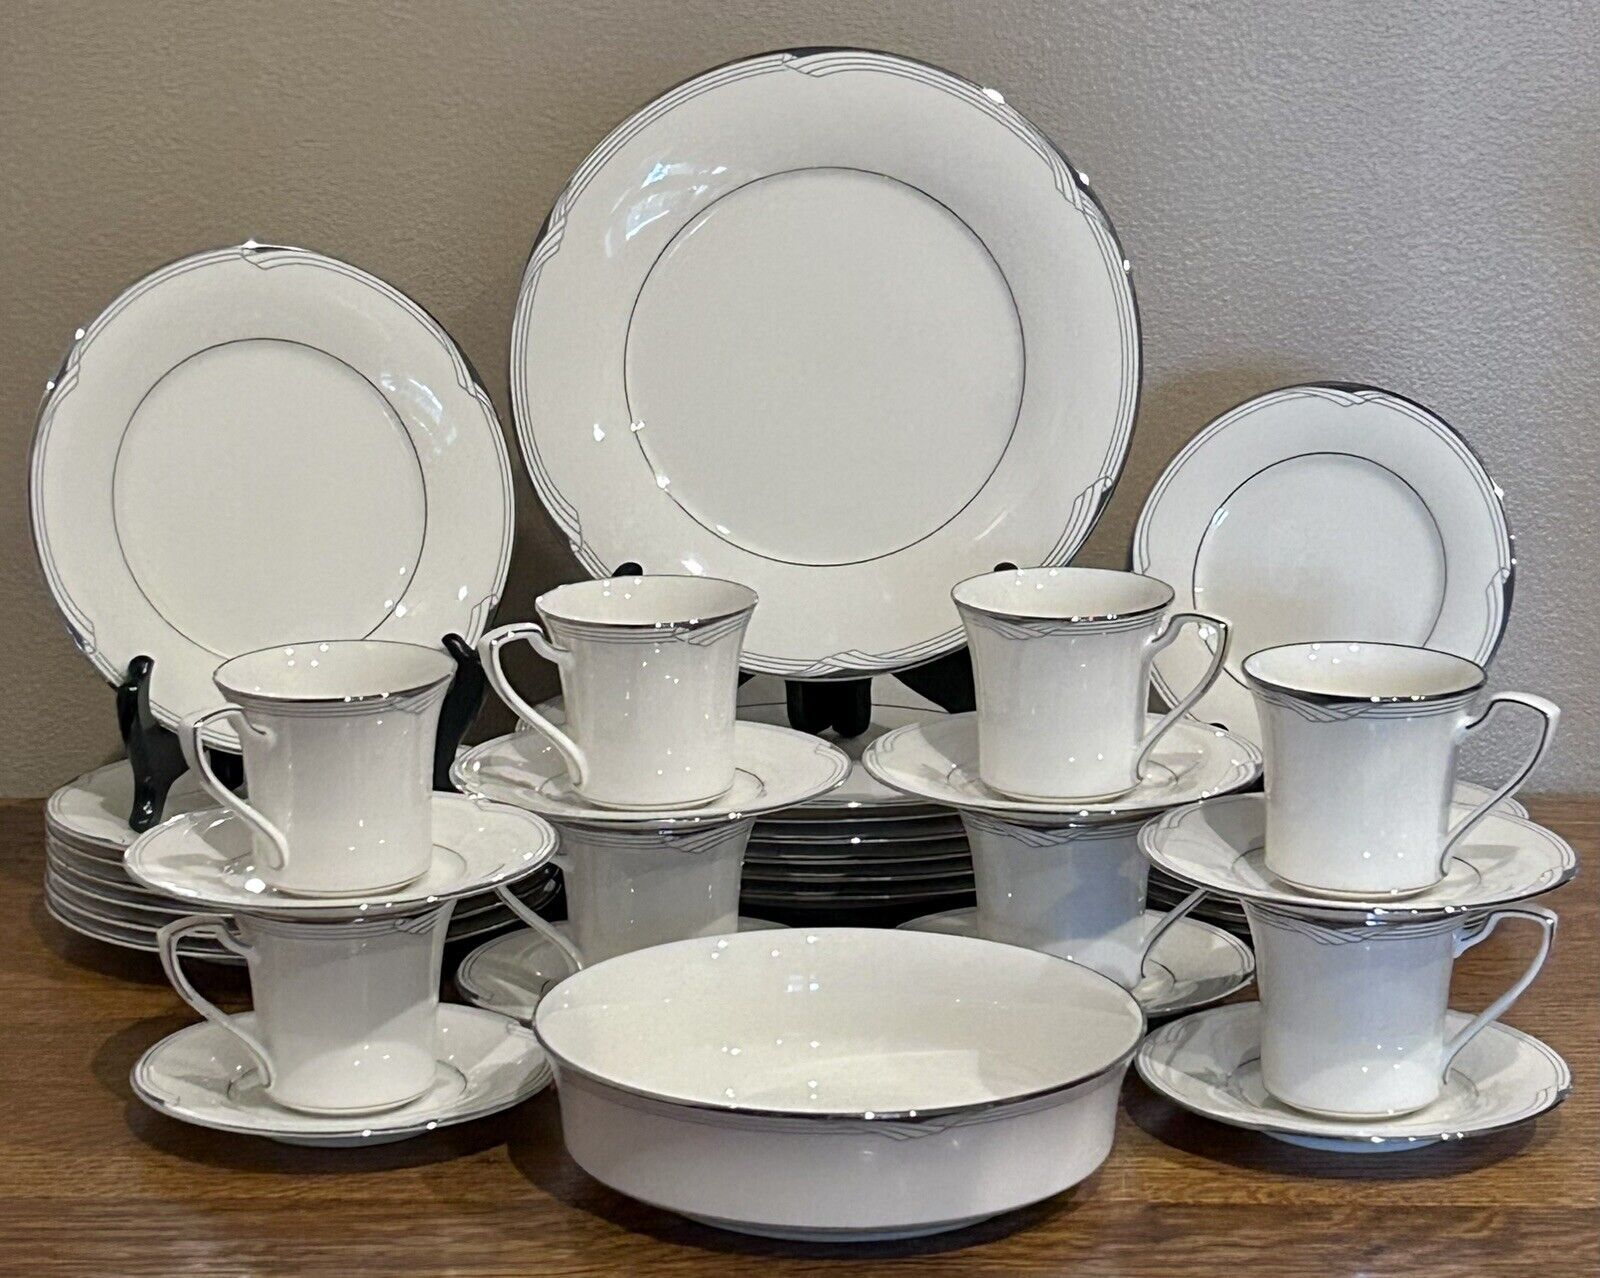 Noritake Sterling Cove Dinner Set 7 Place Settings + Serving Bowl 38 Pieces EUC